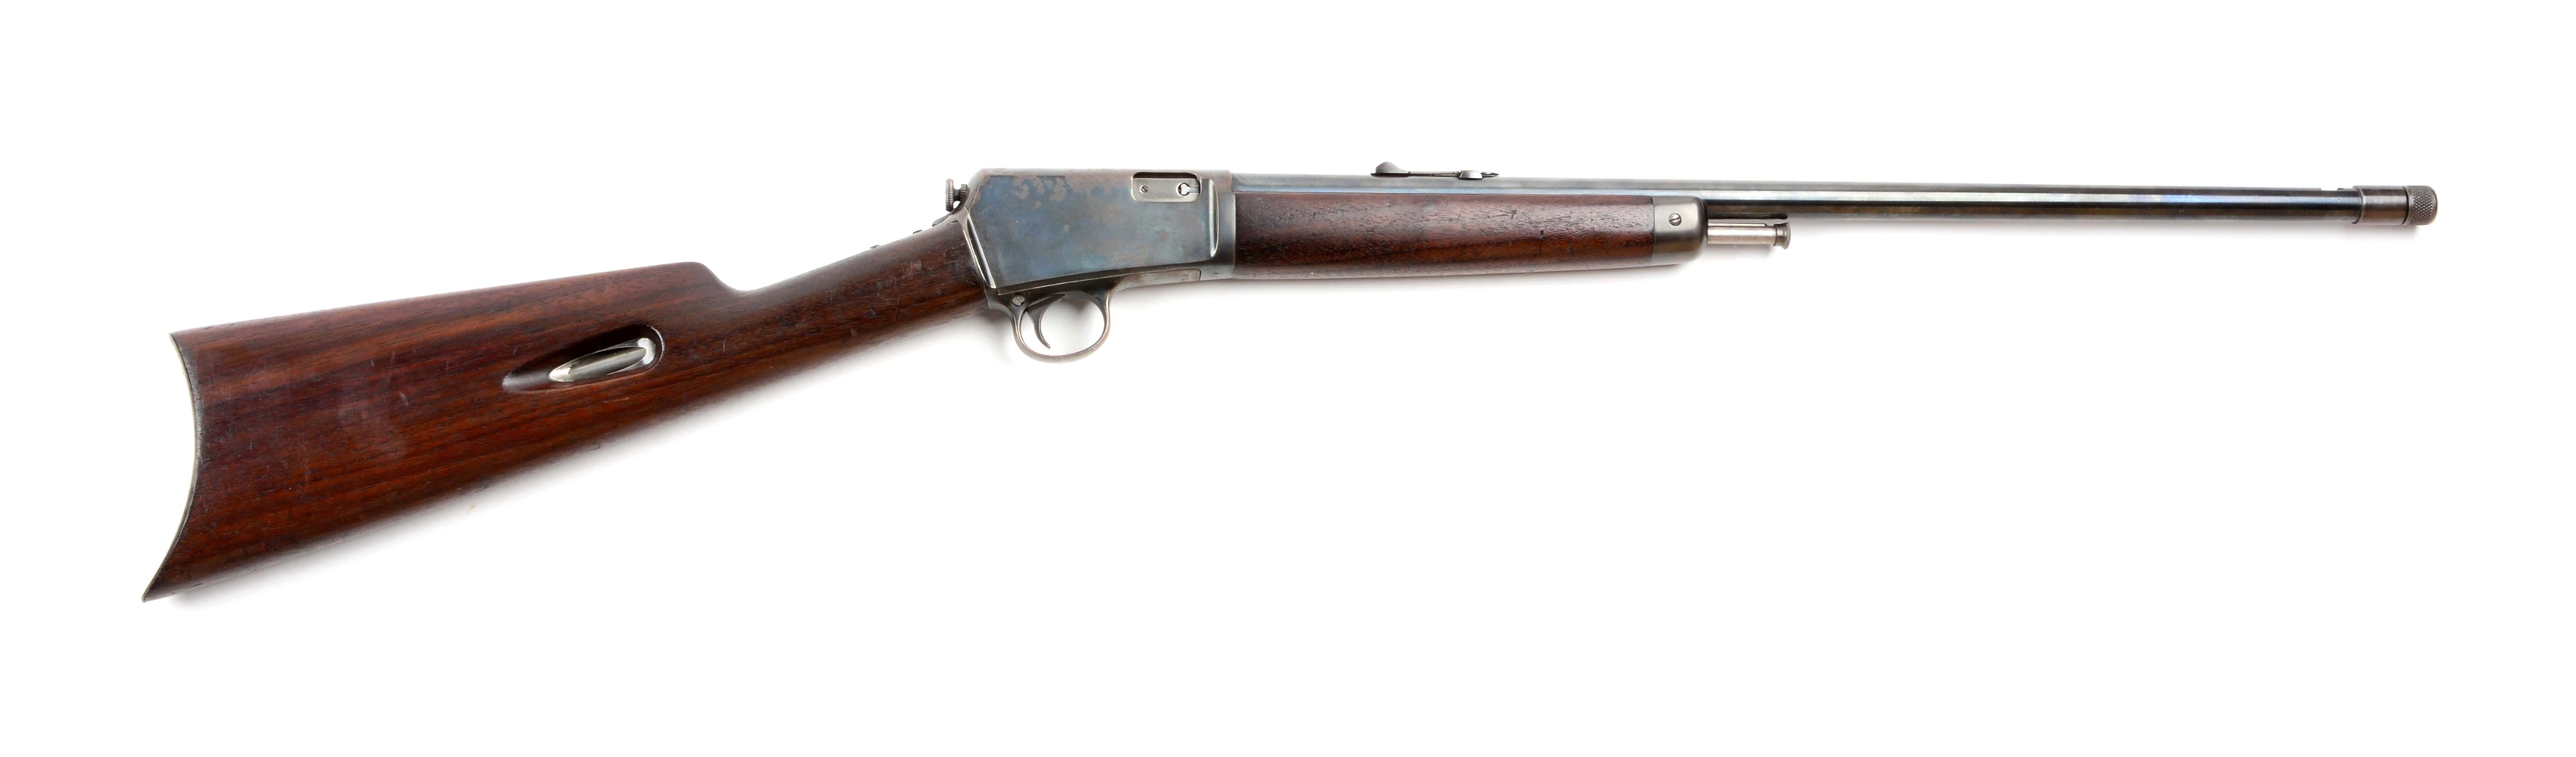 (C) WINCHESTER MODEL 1903 SEMI-AUTOMATIC RIFLE THREADED FOR SILENCER.